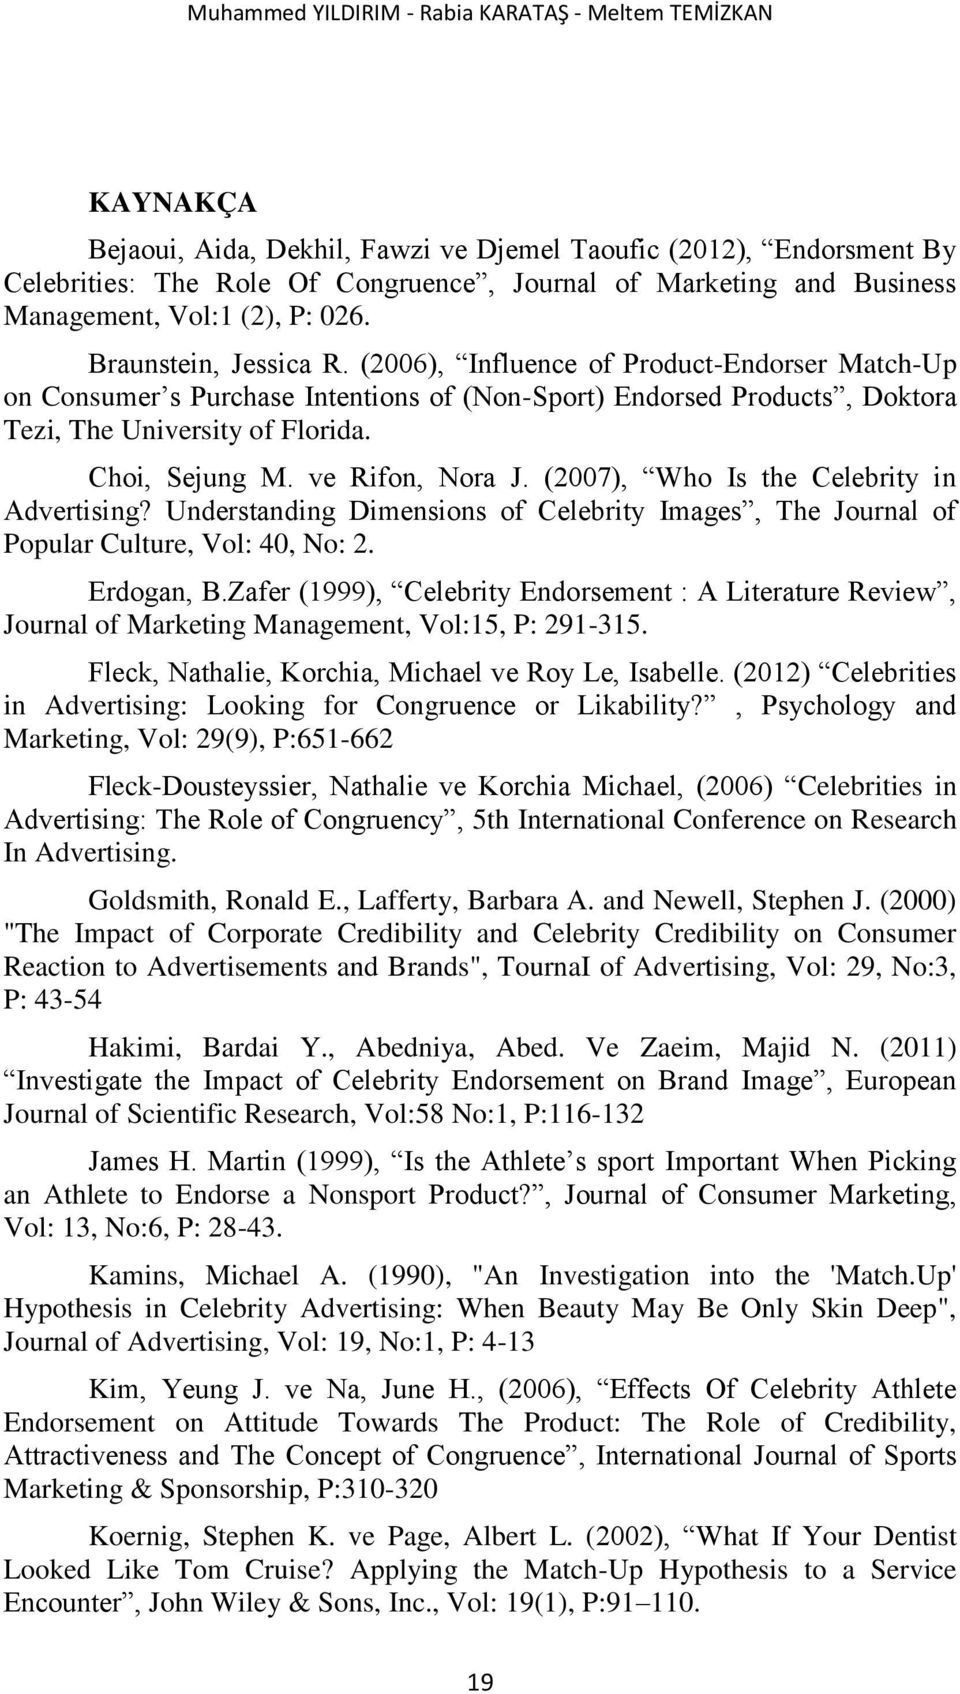 (2006), Influence of Product-Endorser Match-Up on Consumer s Purchase Intentions of (Non-Sport) Endorsed Products, Doktora Tezi, The University of Florida. Choi, Sejung M. ve Rifon, Nora J.